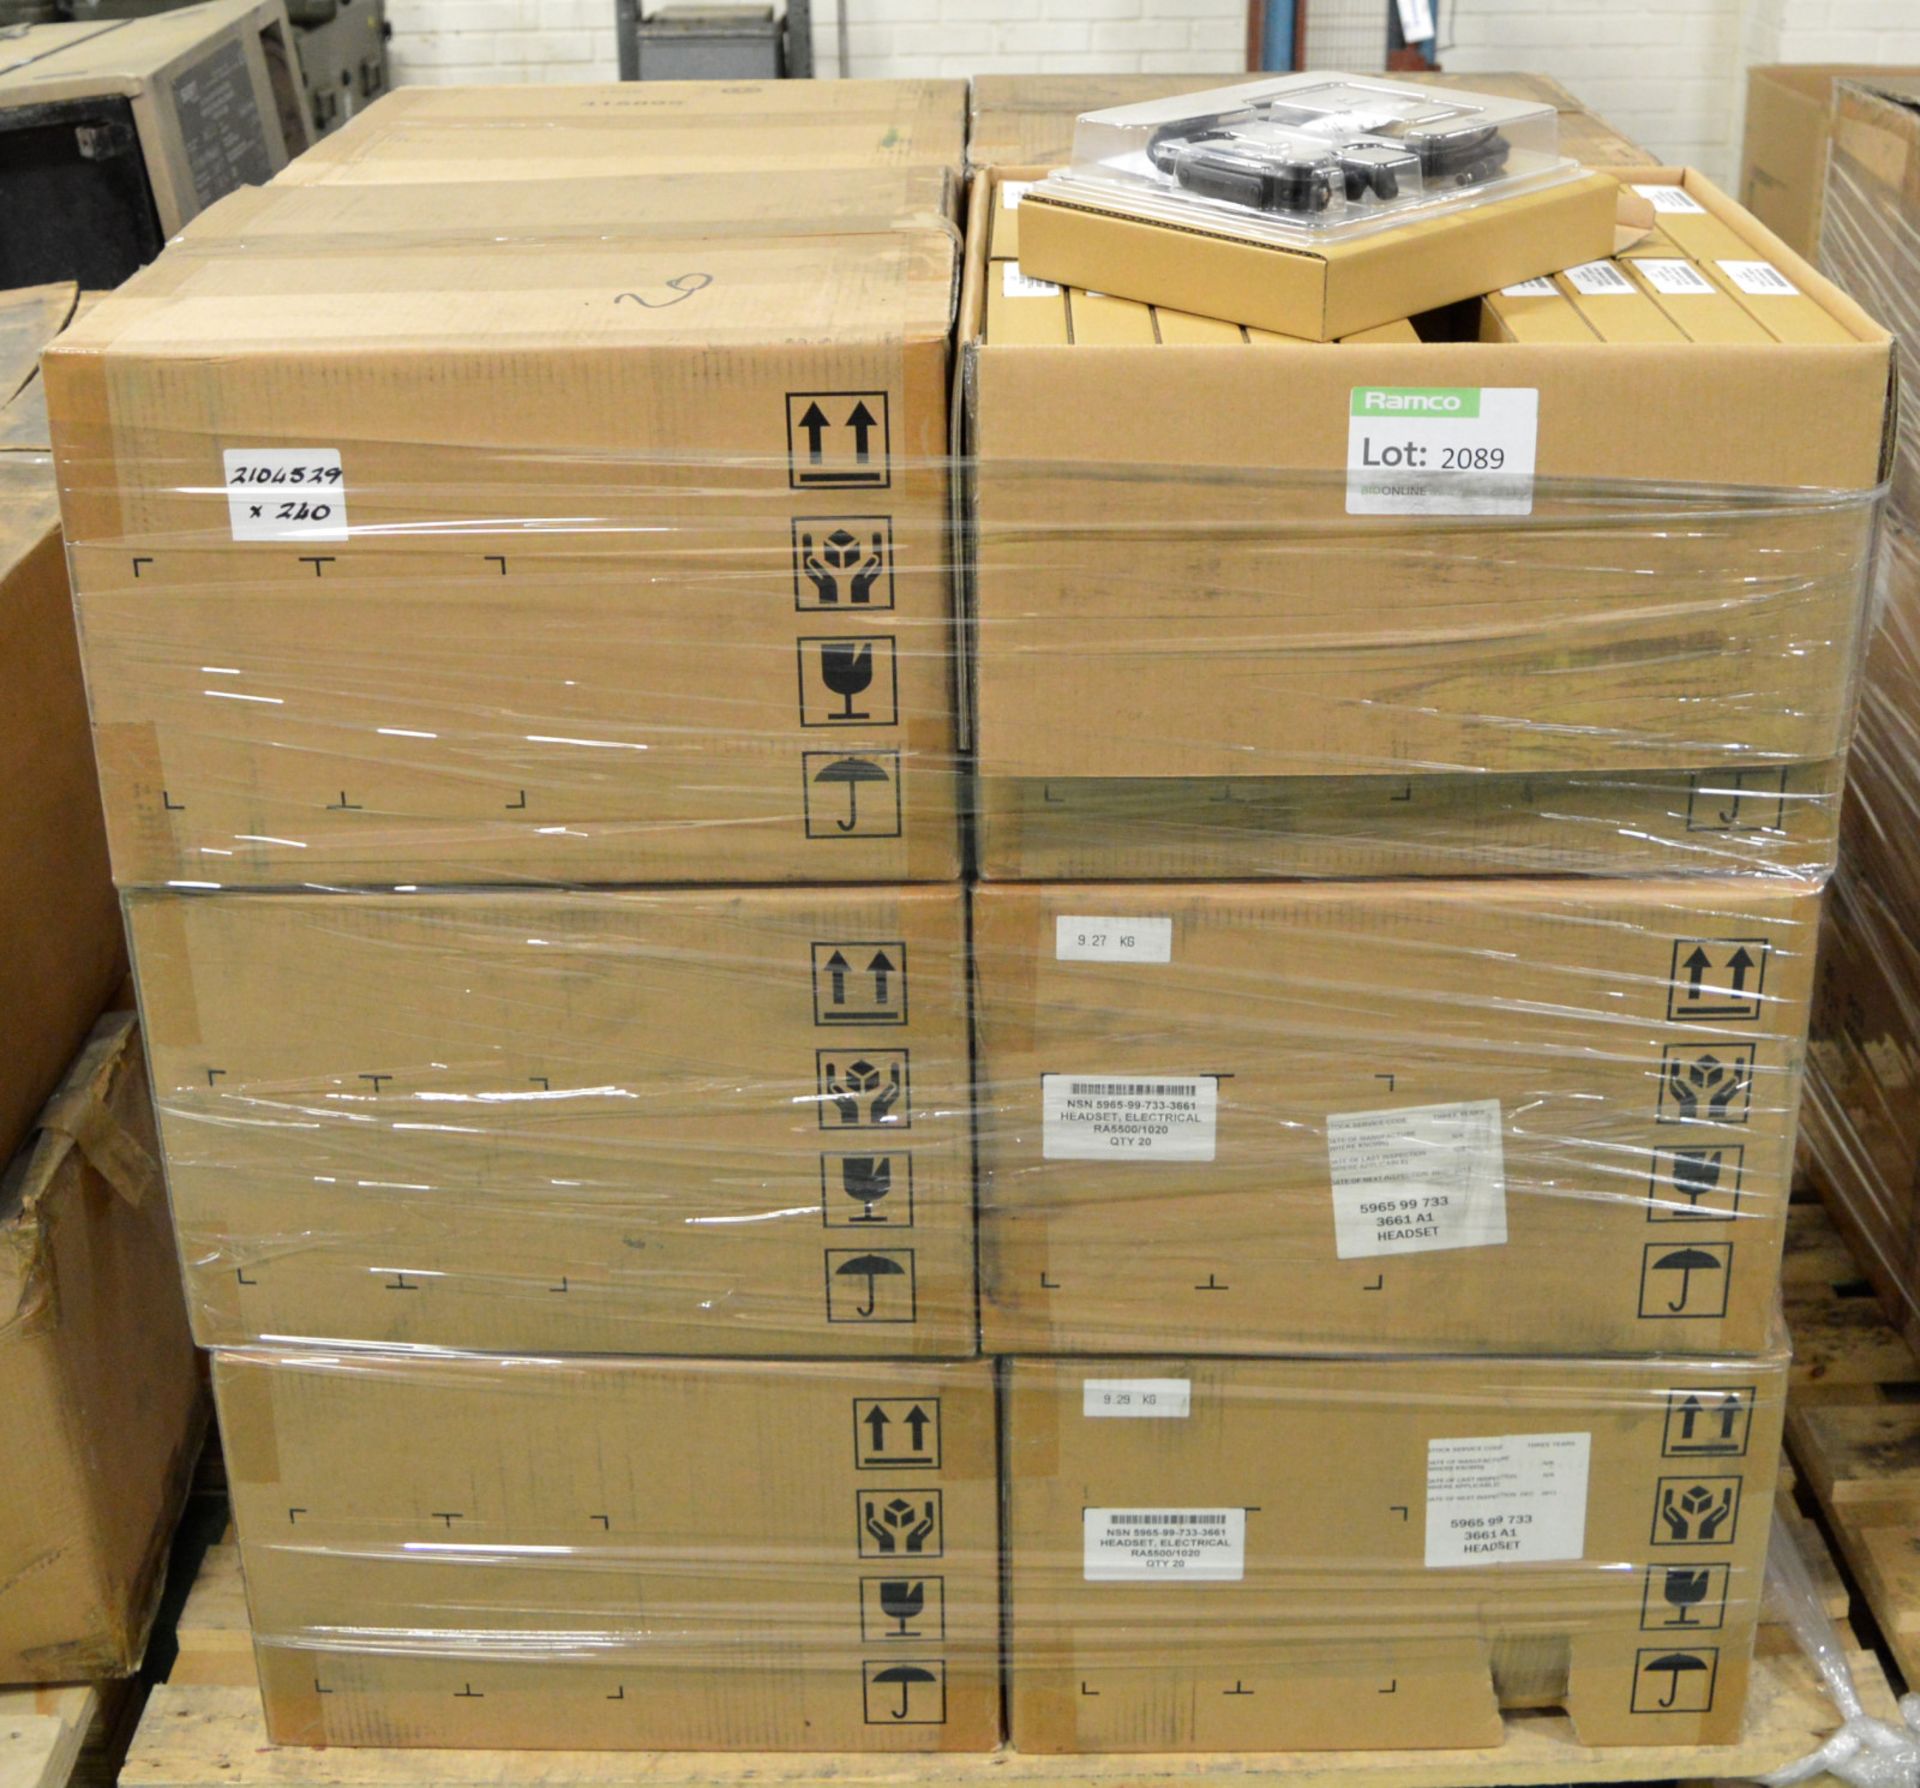 240x Frontier1000 Communication System Headsets RA5500/1020 - NSN 5965-99-733-3661.